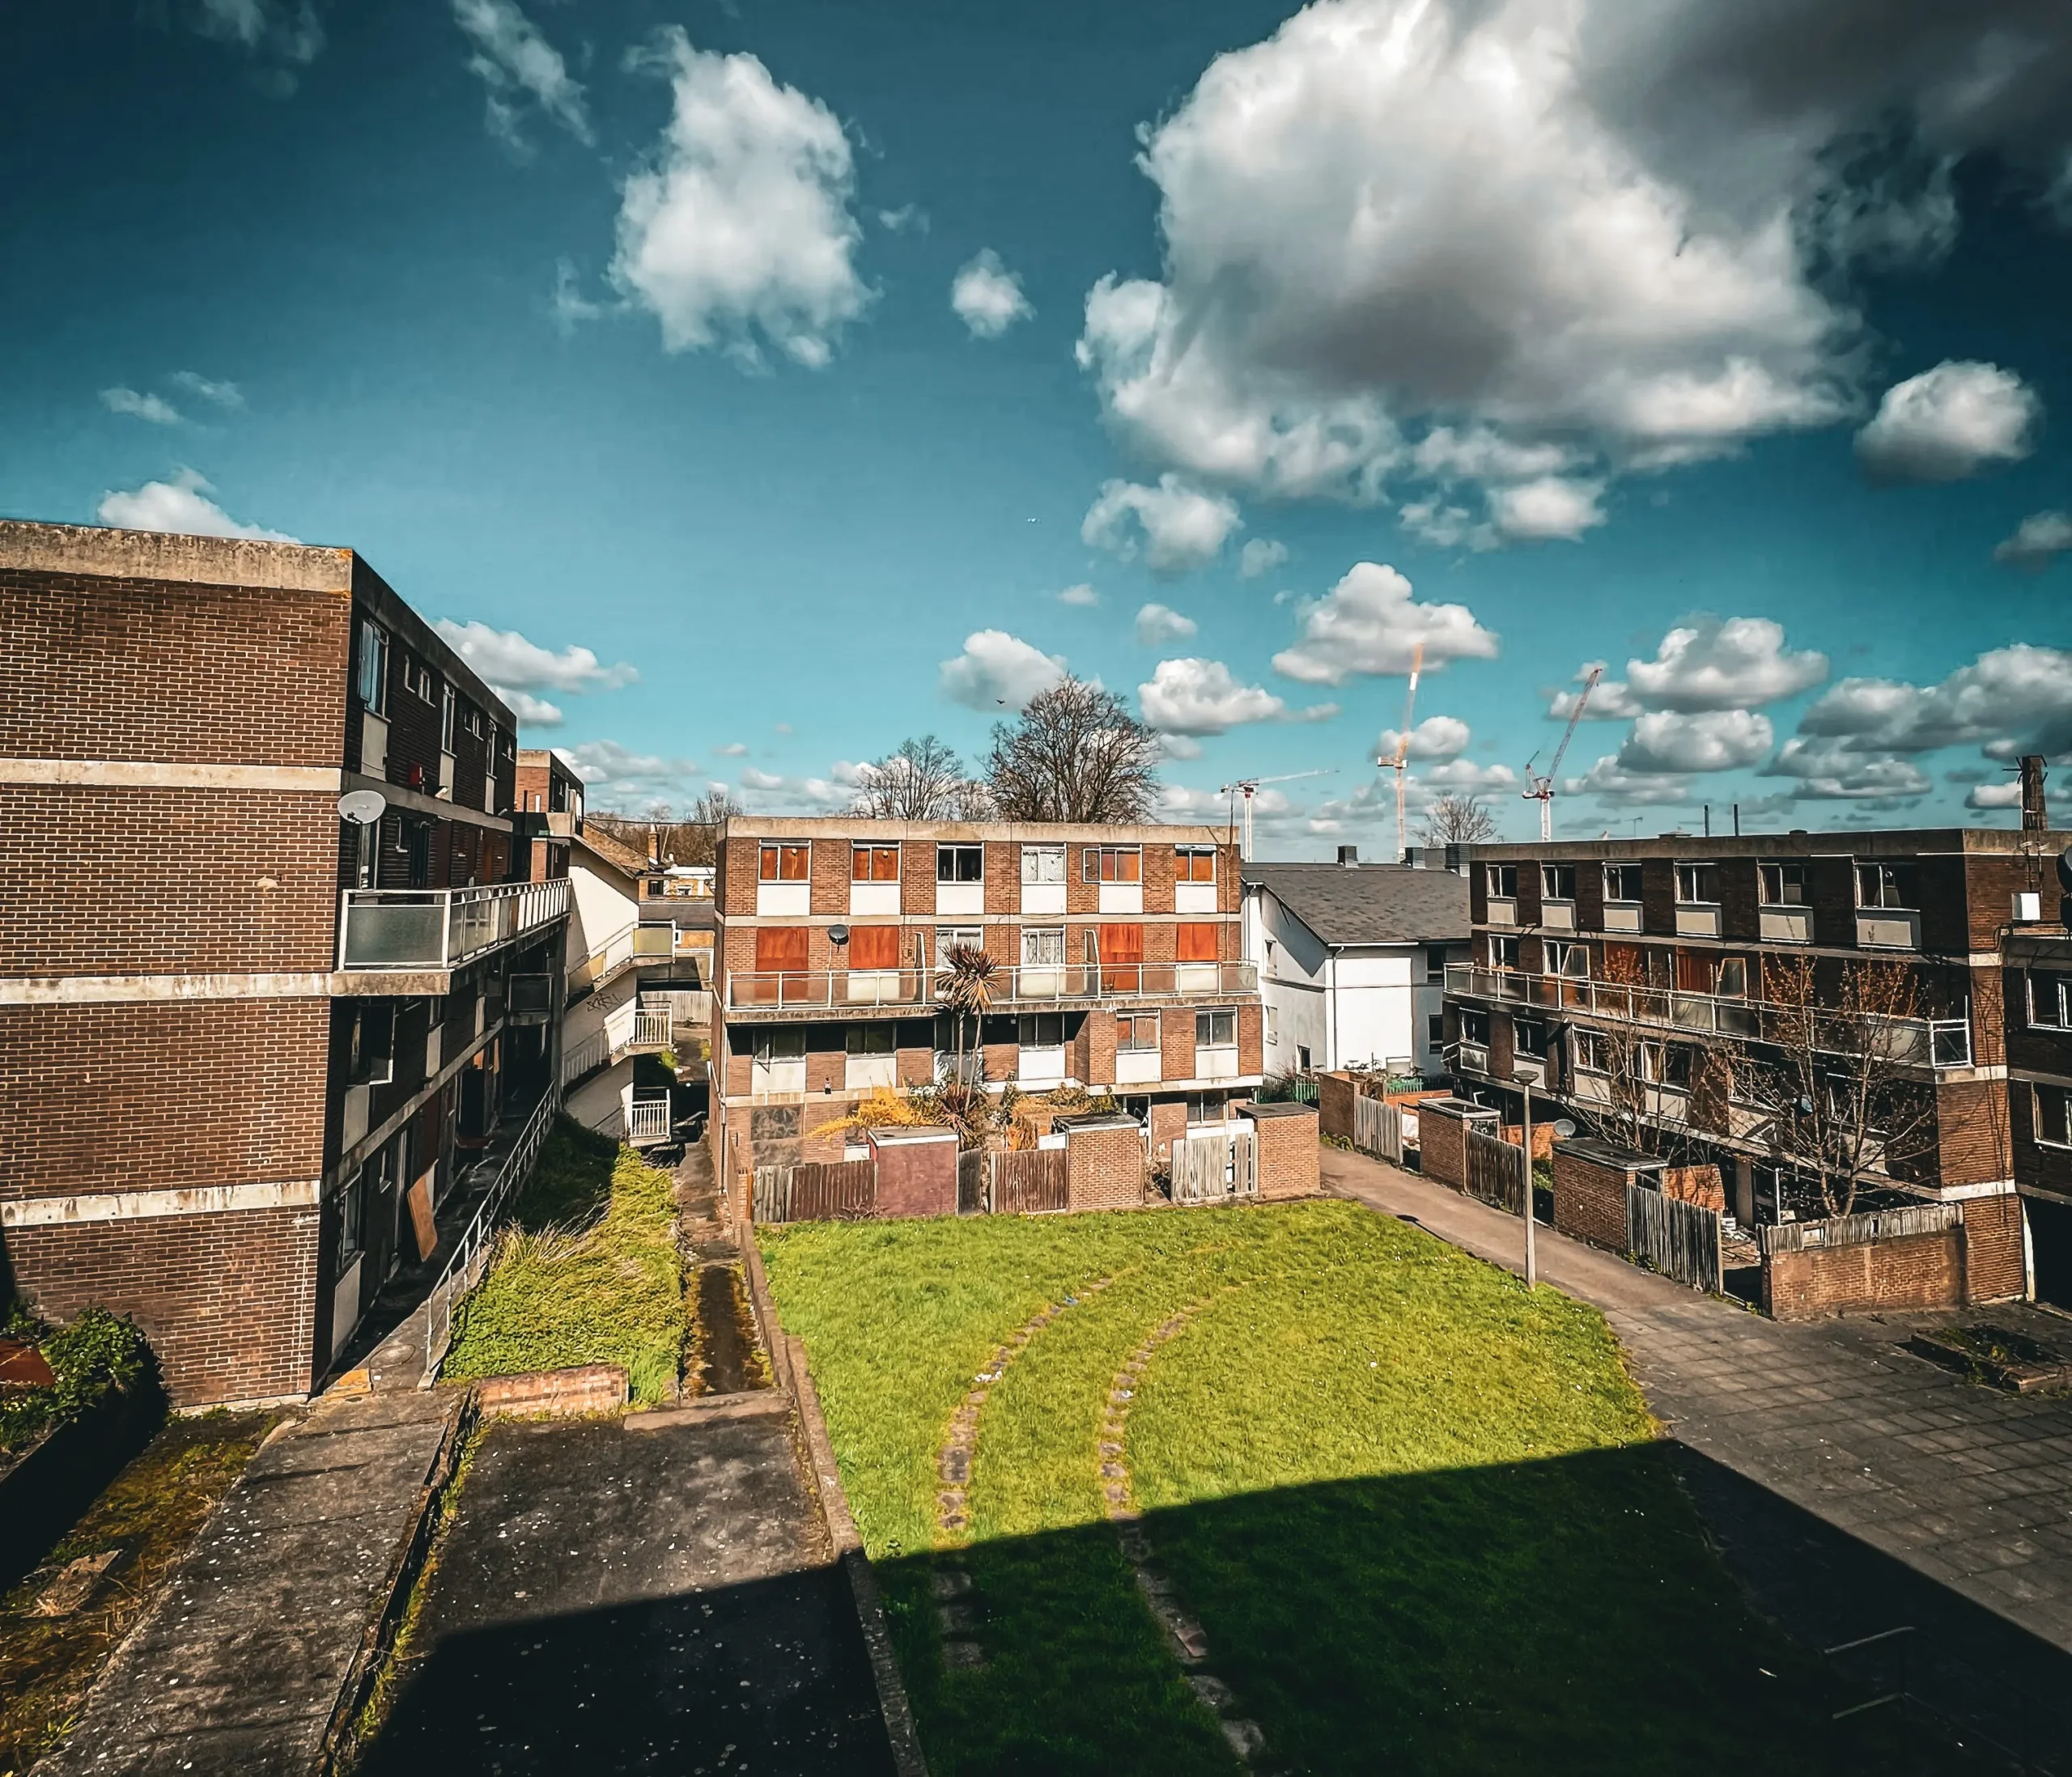 172 homes left to rot, London estate